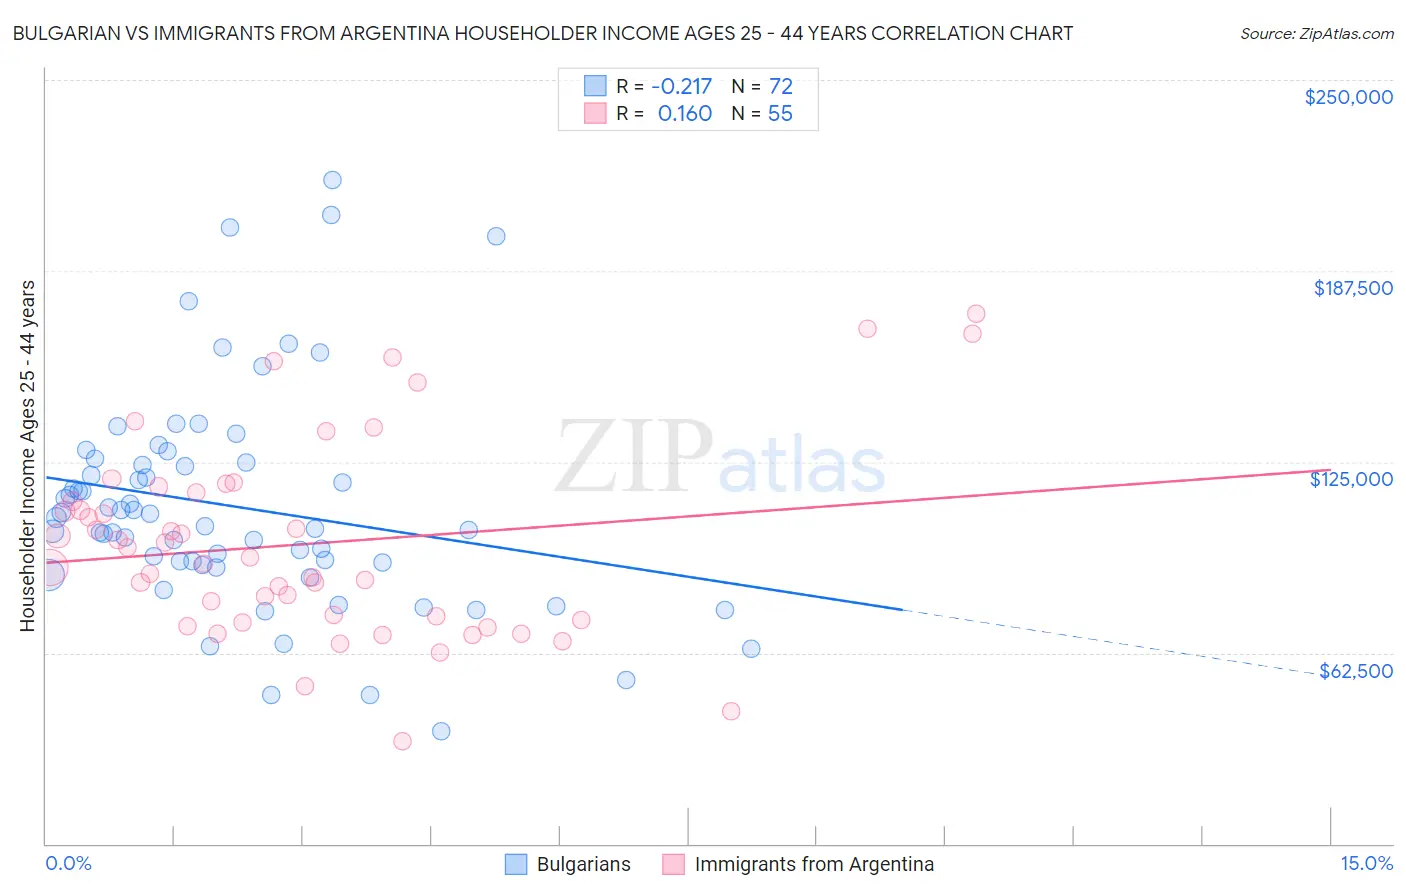 Bulgarian vs Immigrants from Argentina Householder Income Ages 25 - 44 years